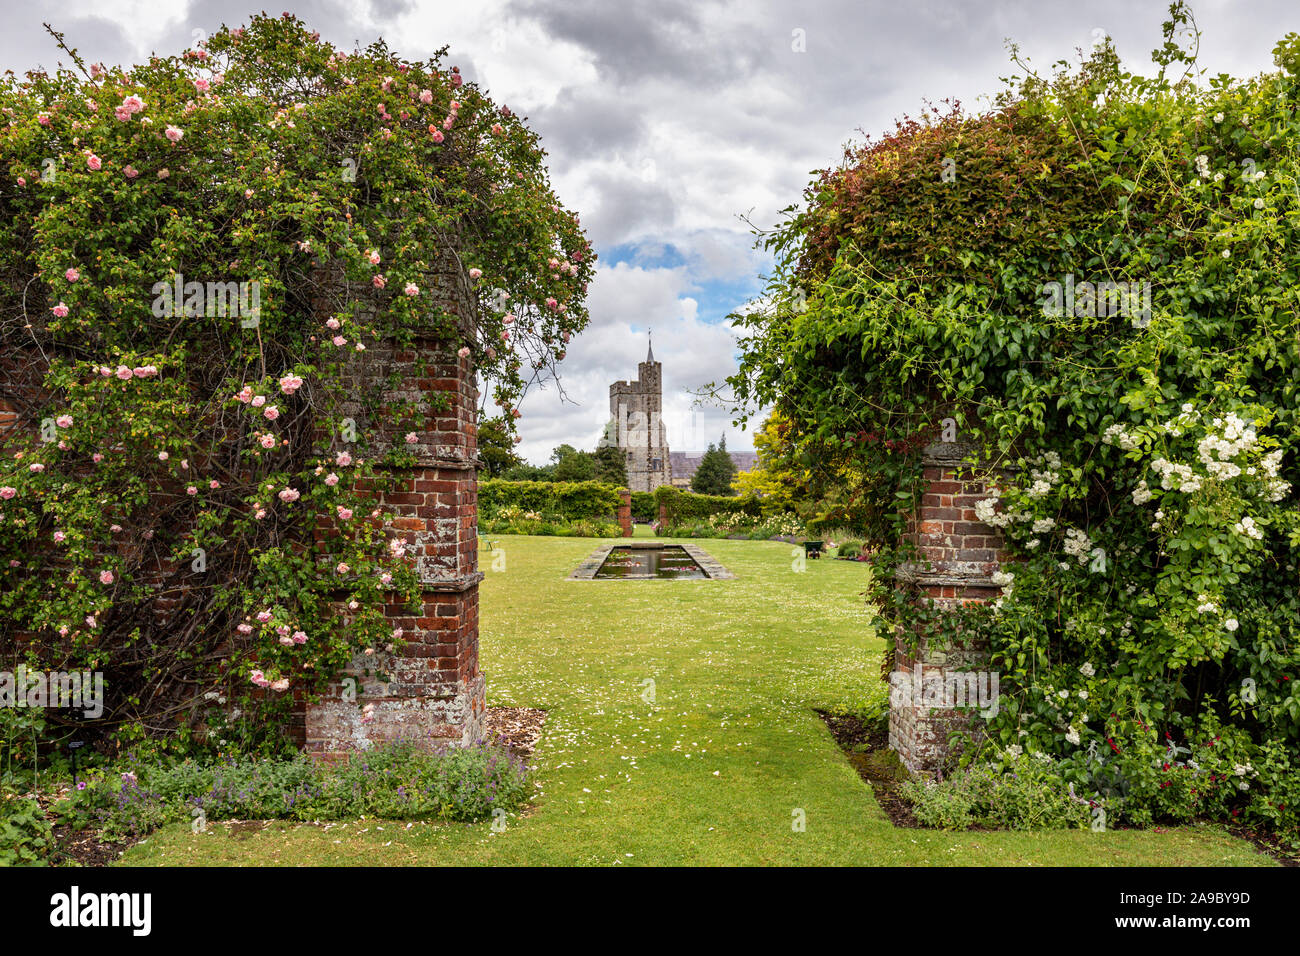 The Church of St Cross viewed from the walled gardens at Goodnestone Park, Goodnestone, Dover, Kent, UK Stock Photo